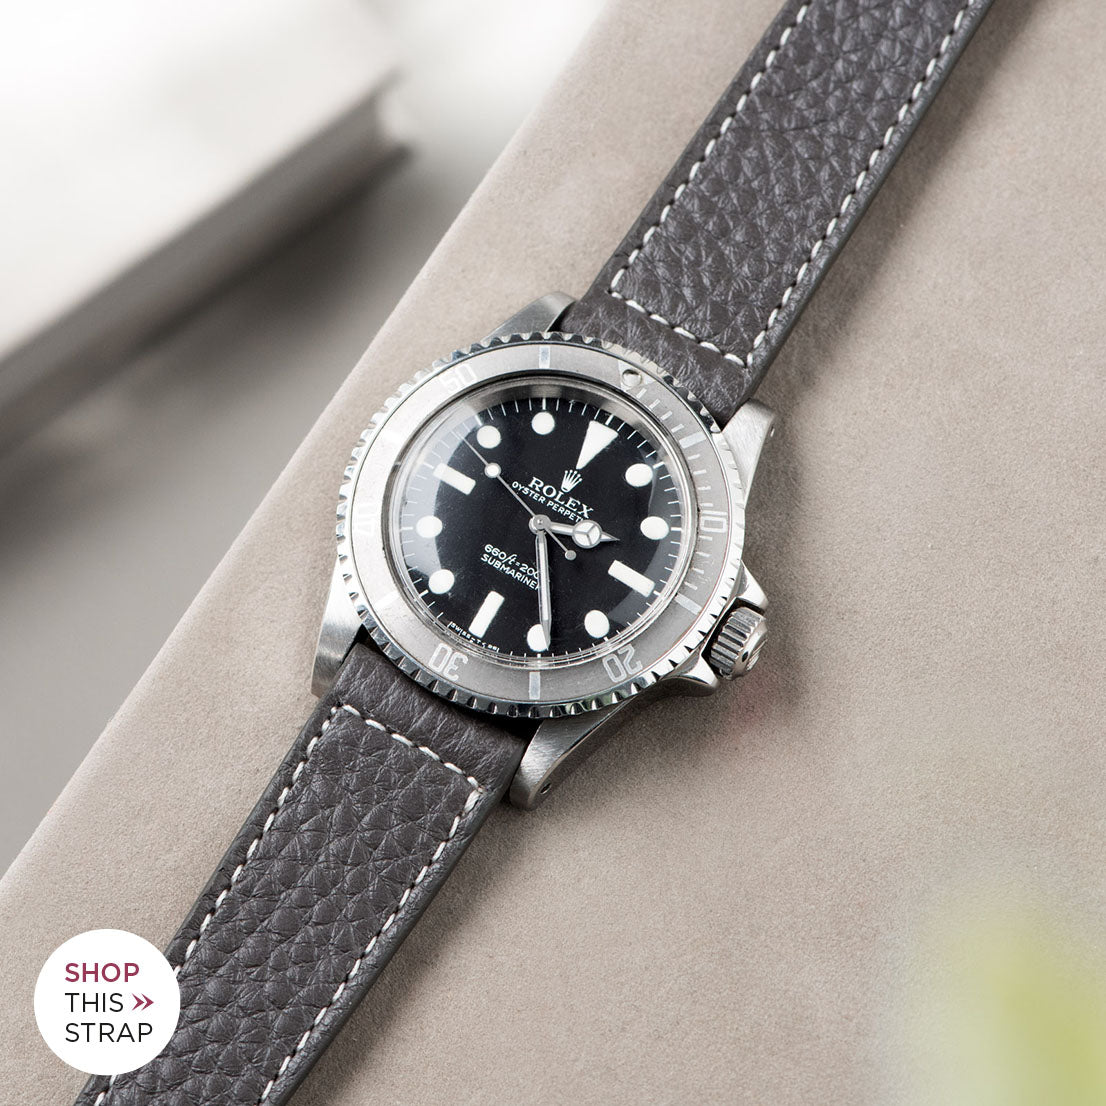 Bulang and Sons_Strap Guide_The Rolex 5513 Faded Maxi Submariner_Elephant Grey Leather Watch Strap